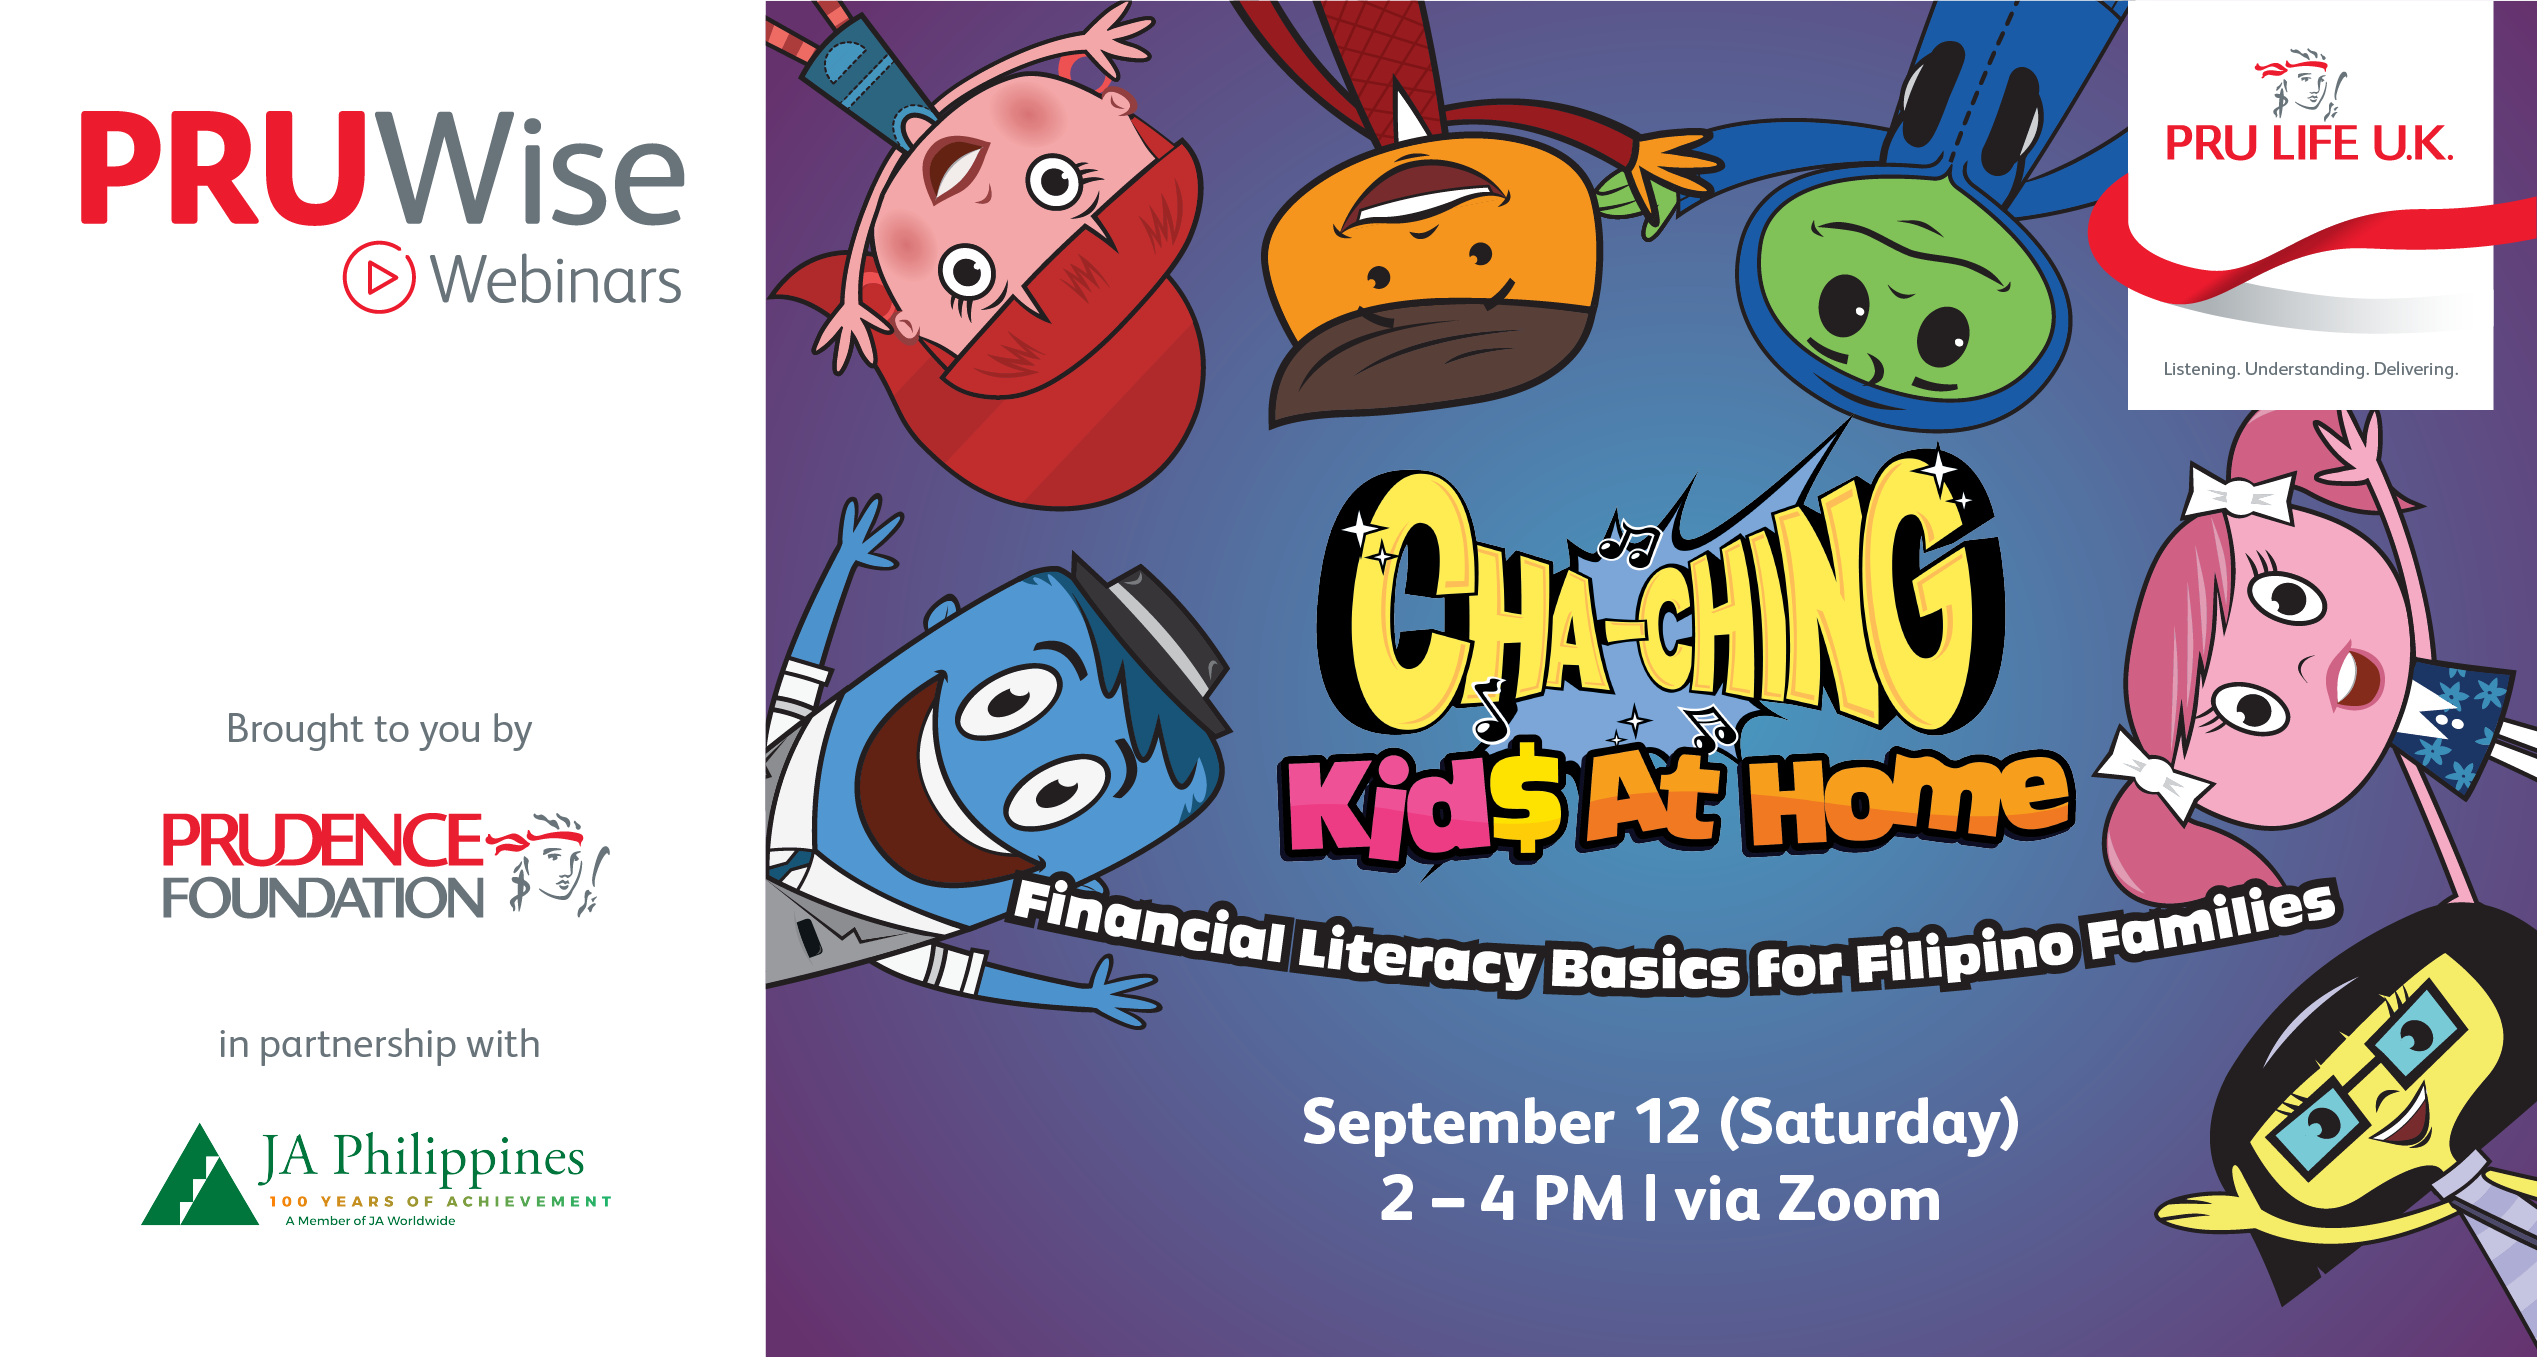 Pru Life UK offers free webinar on financial literacy featuring Cha-Ching Kid$ at Home resources